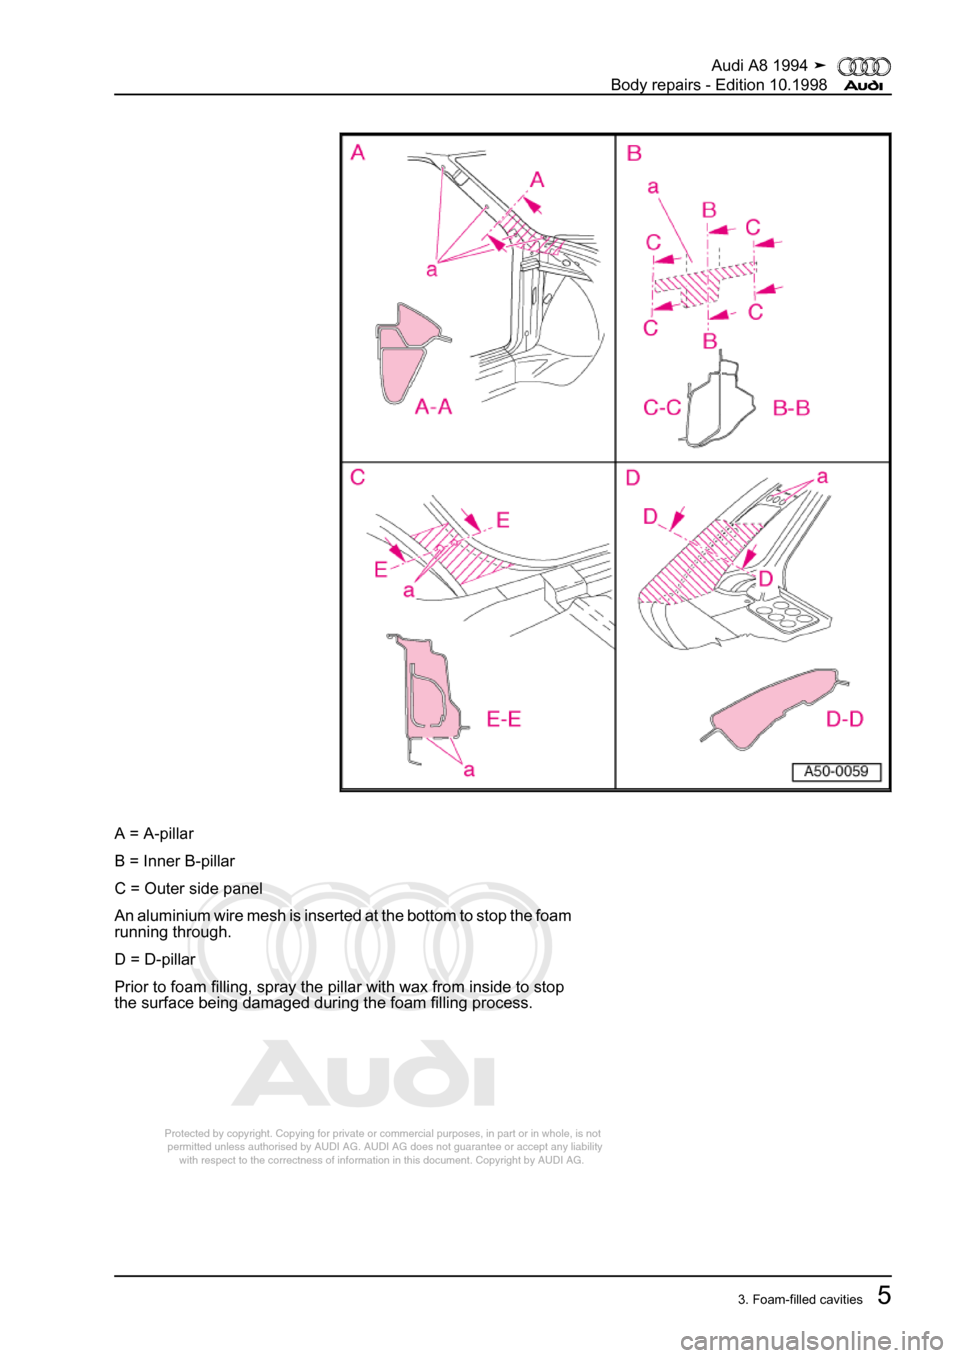 AUDI A8 1994 D4 / 1.G Body Repairs Workshop Manual 
Protected by copyright. Copying for private or commercial purposes, in p\
art or in whole, is not 
 permitted unless authorised by AUDI AG. AUDI AG does not guarantee or a\
ccept any liability 
     